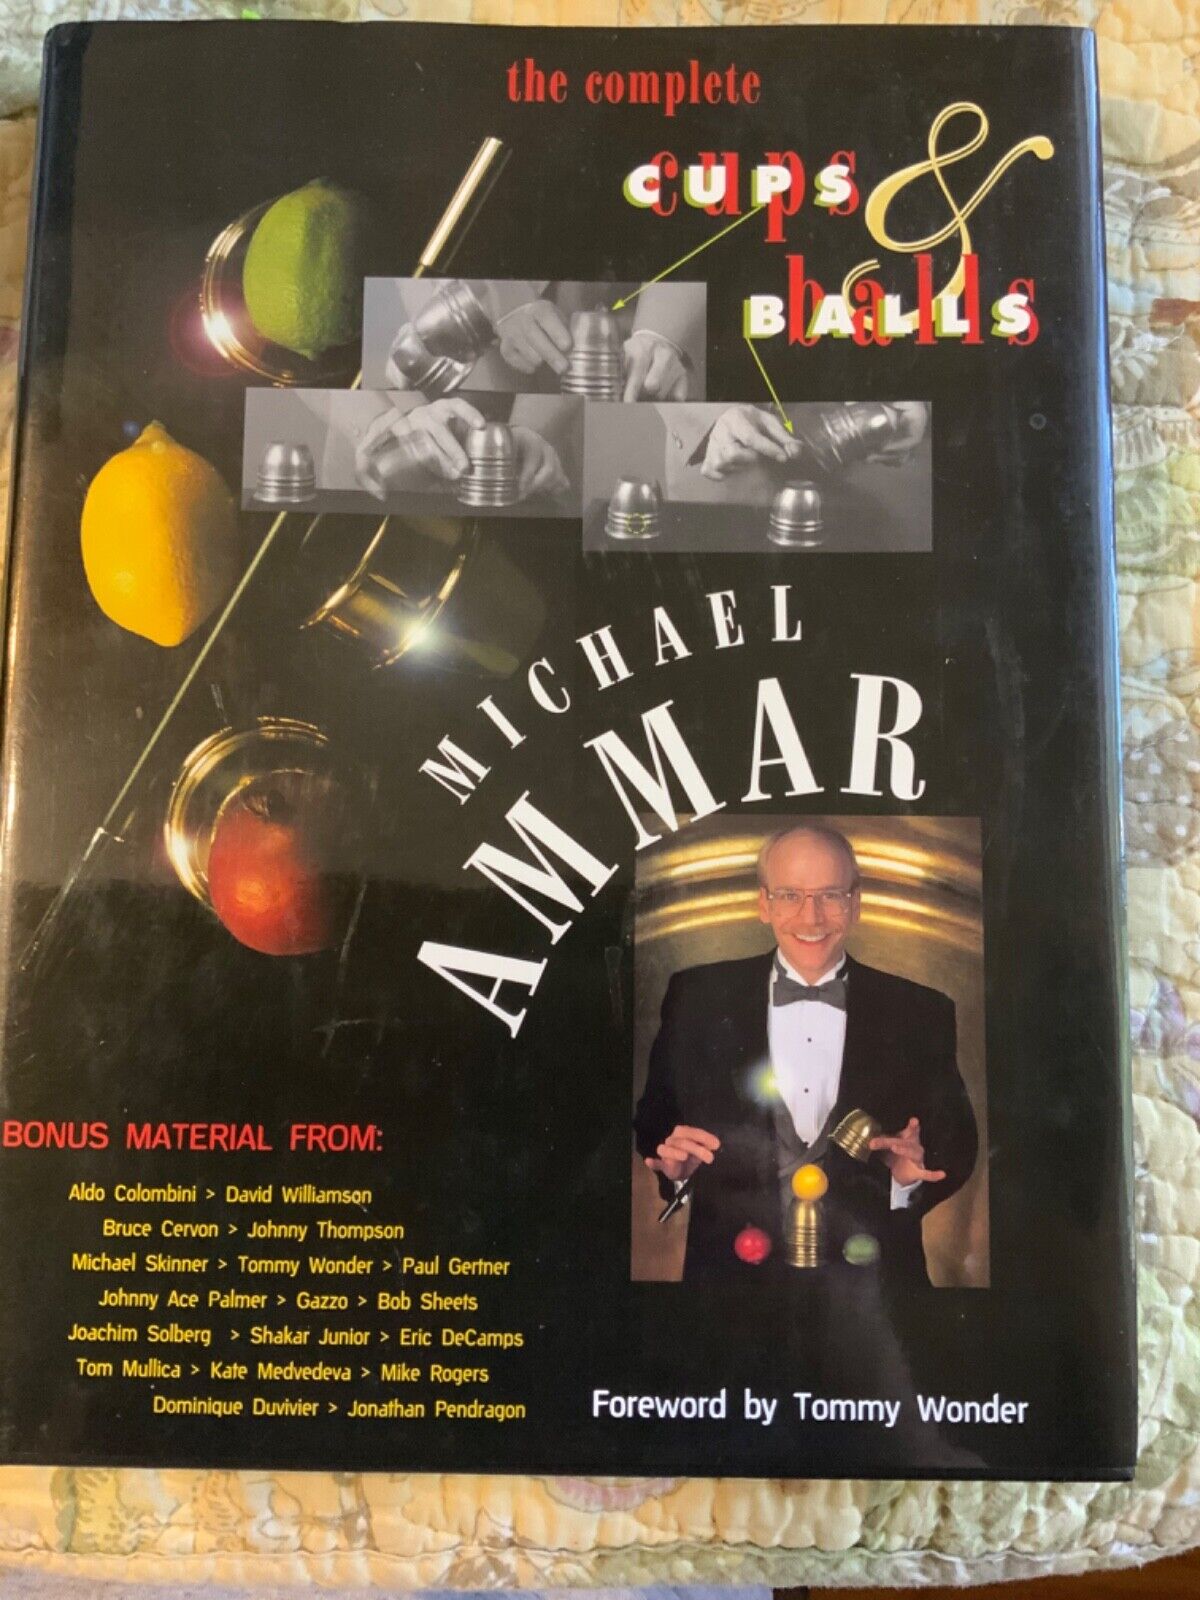 The Complete Cups and Balls-Michael Ammar Magic Book-1st Ed INSCRIBED & SIGNED